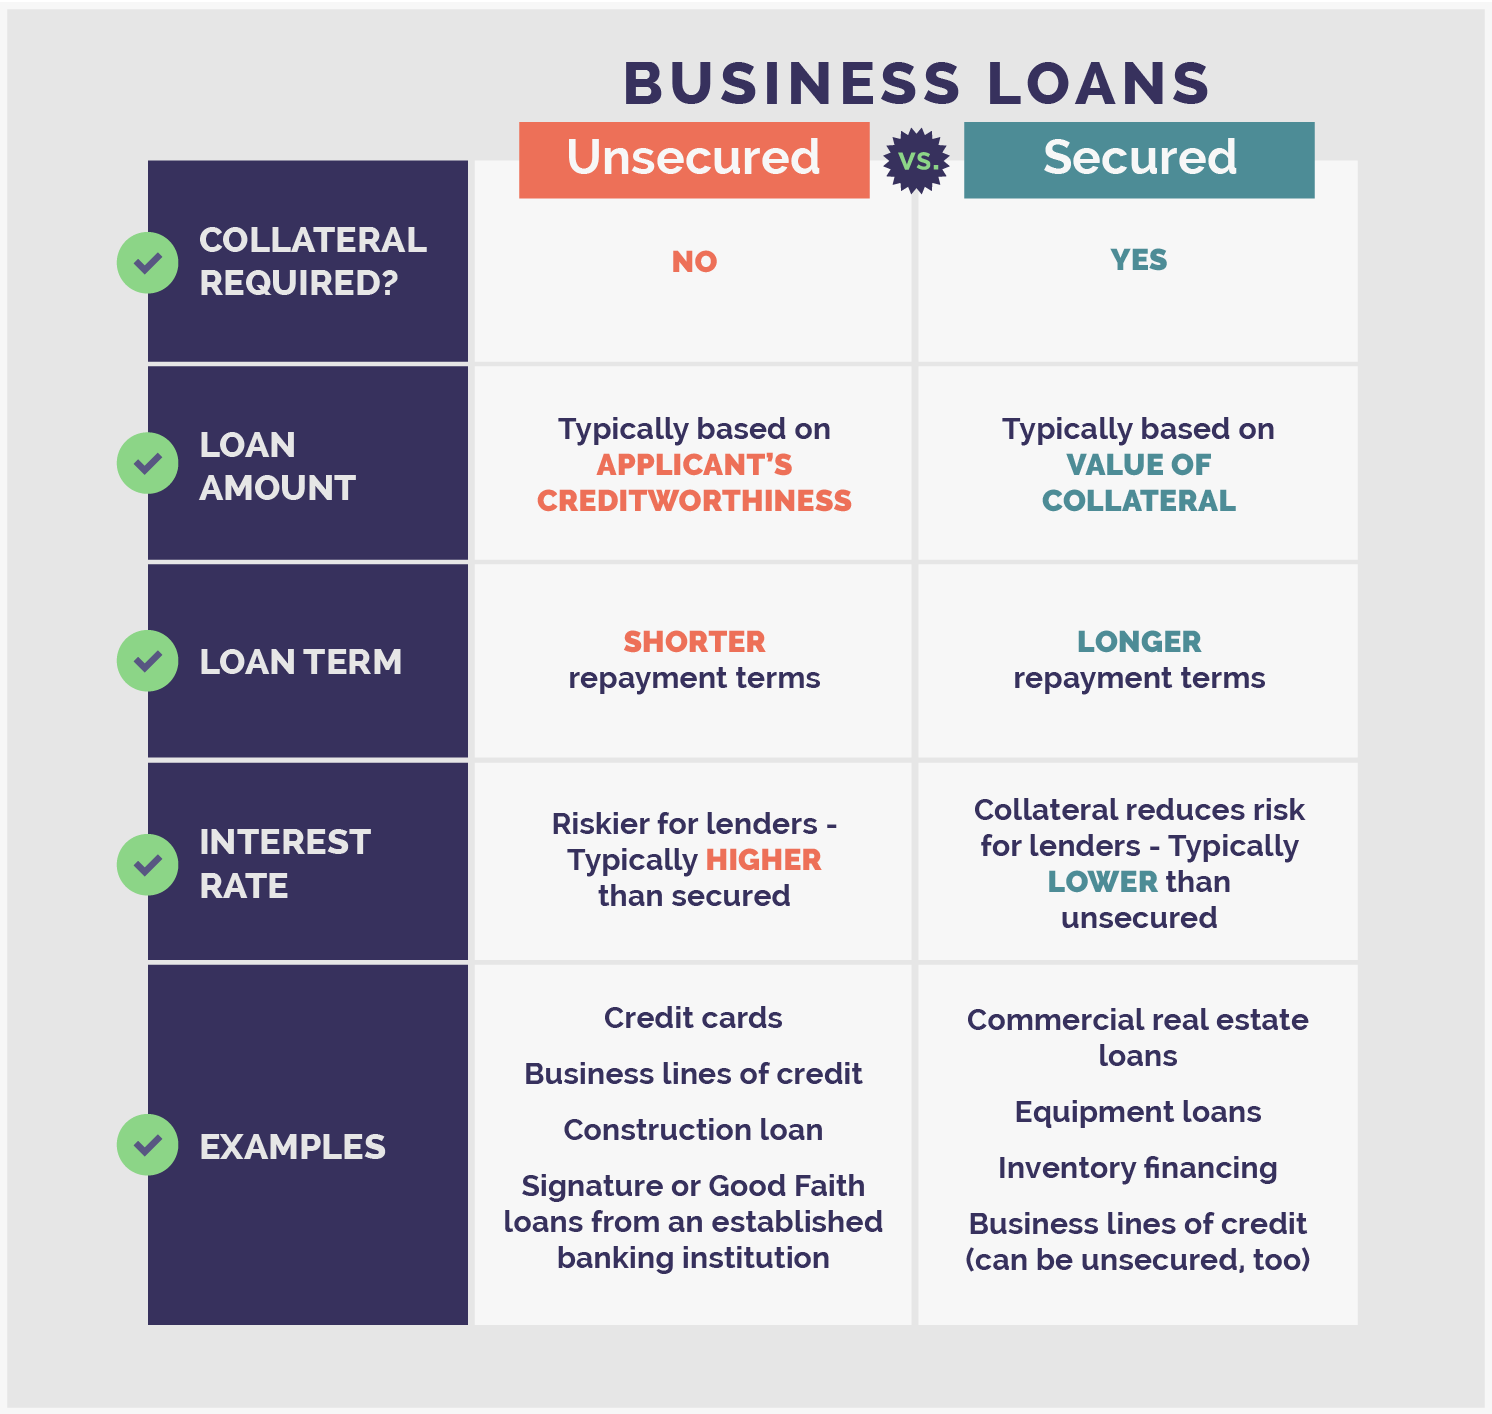 Unsecured Business Loan - Loan for Business Without Security